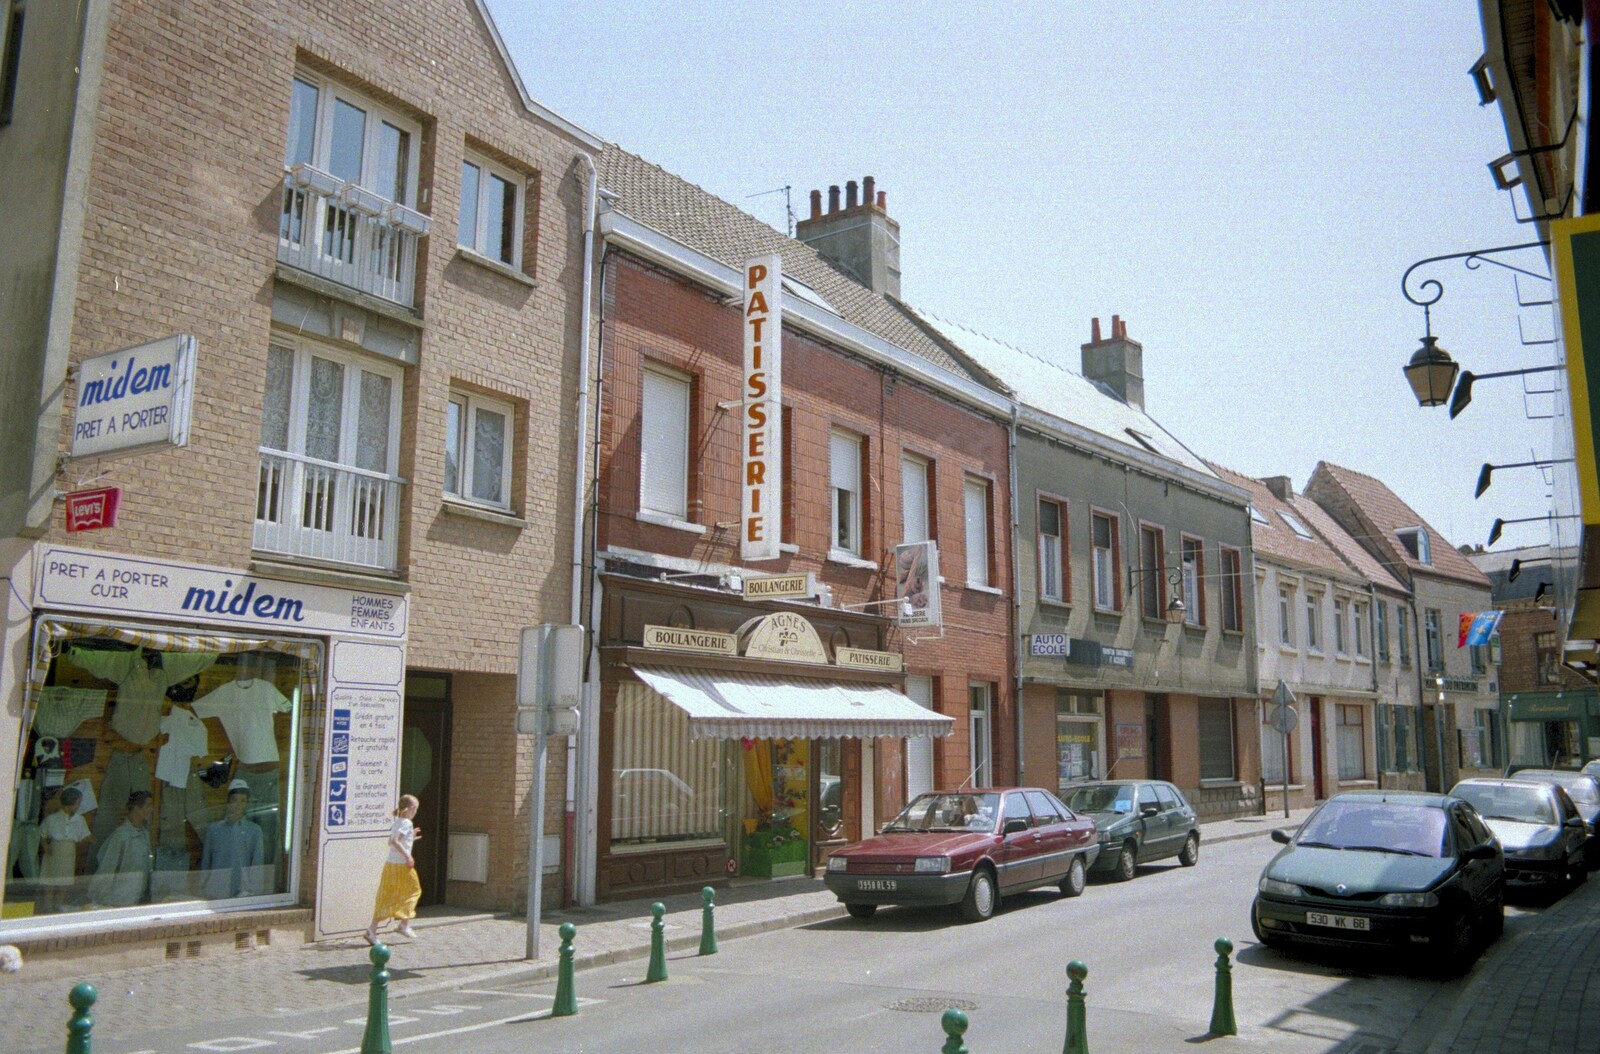 Gravelines high street from A BSCC Bike Ride to Gravelines, Pas de Calais, France - 11th May 2000